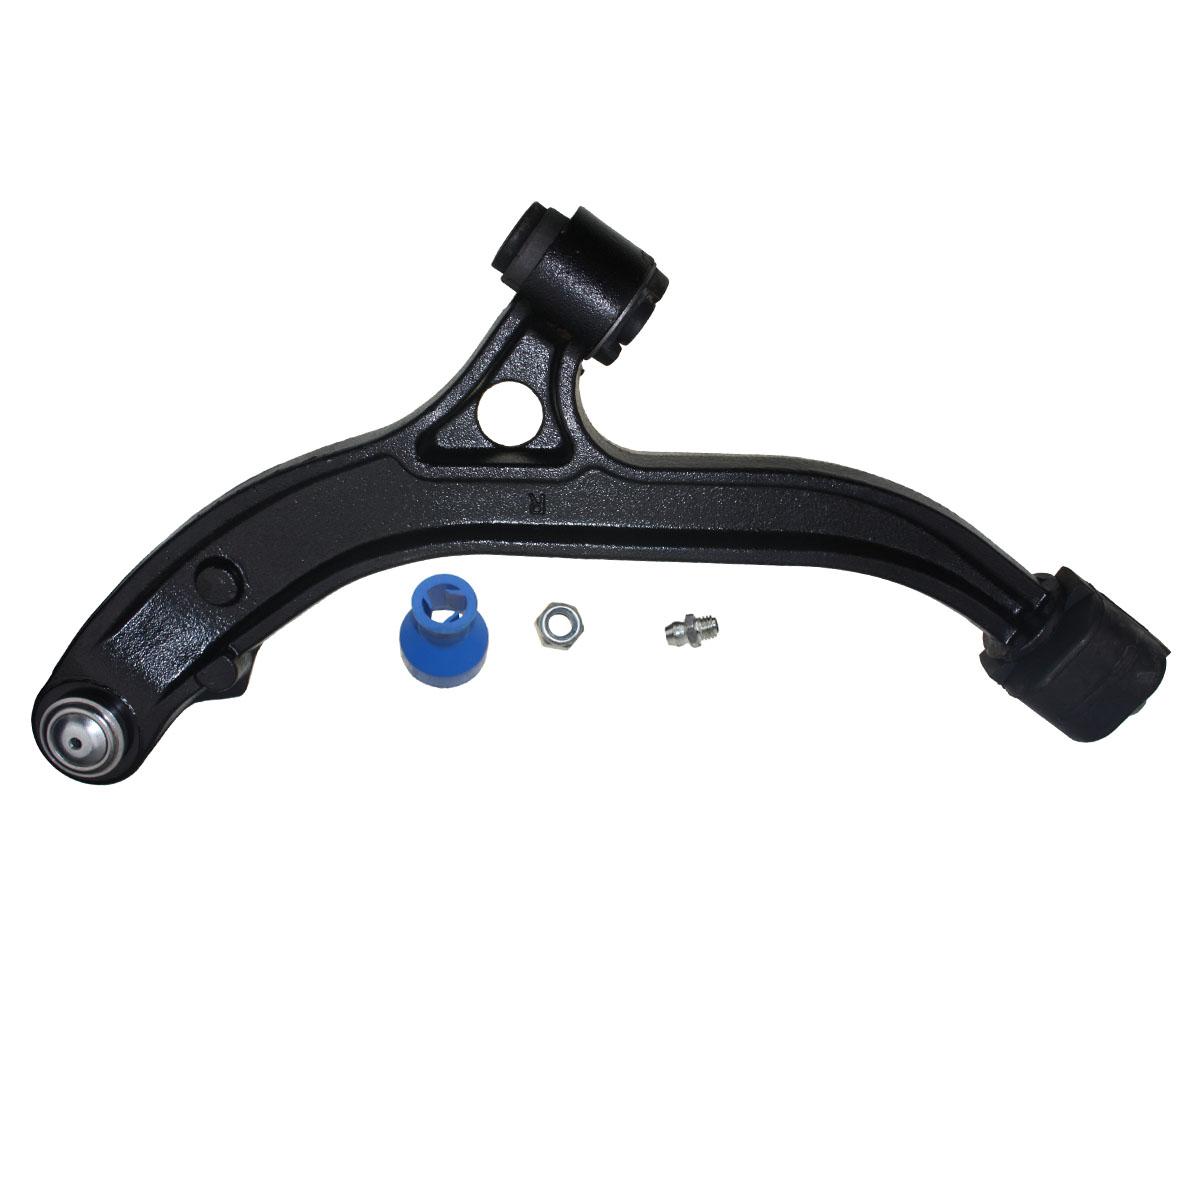 Suspension Front Lower Control Arms w/Ball Joint For Dodge Caravan 2001-2007 | eBay 2005 Dodge Grand Caravan Lower Control Arm